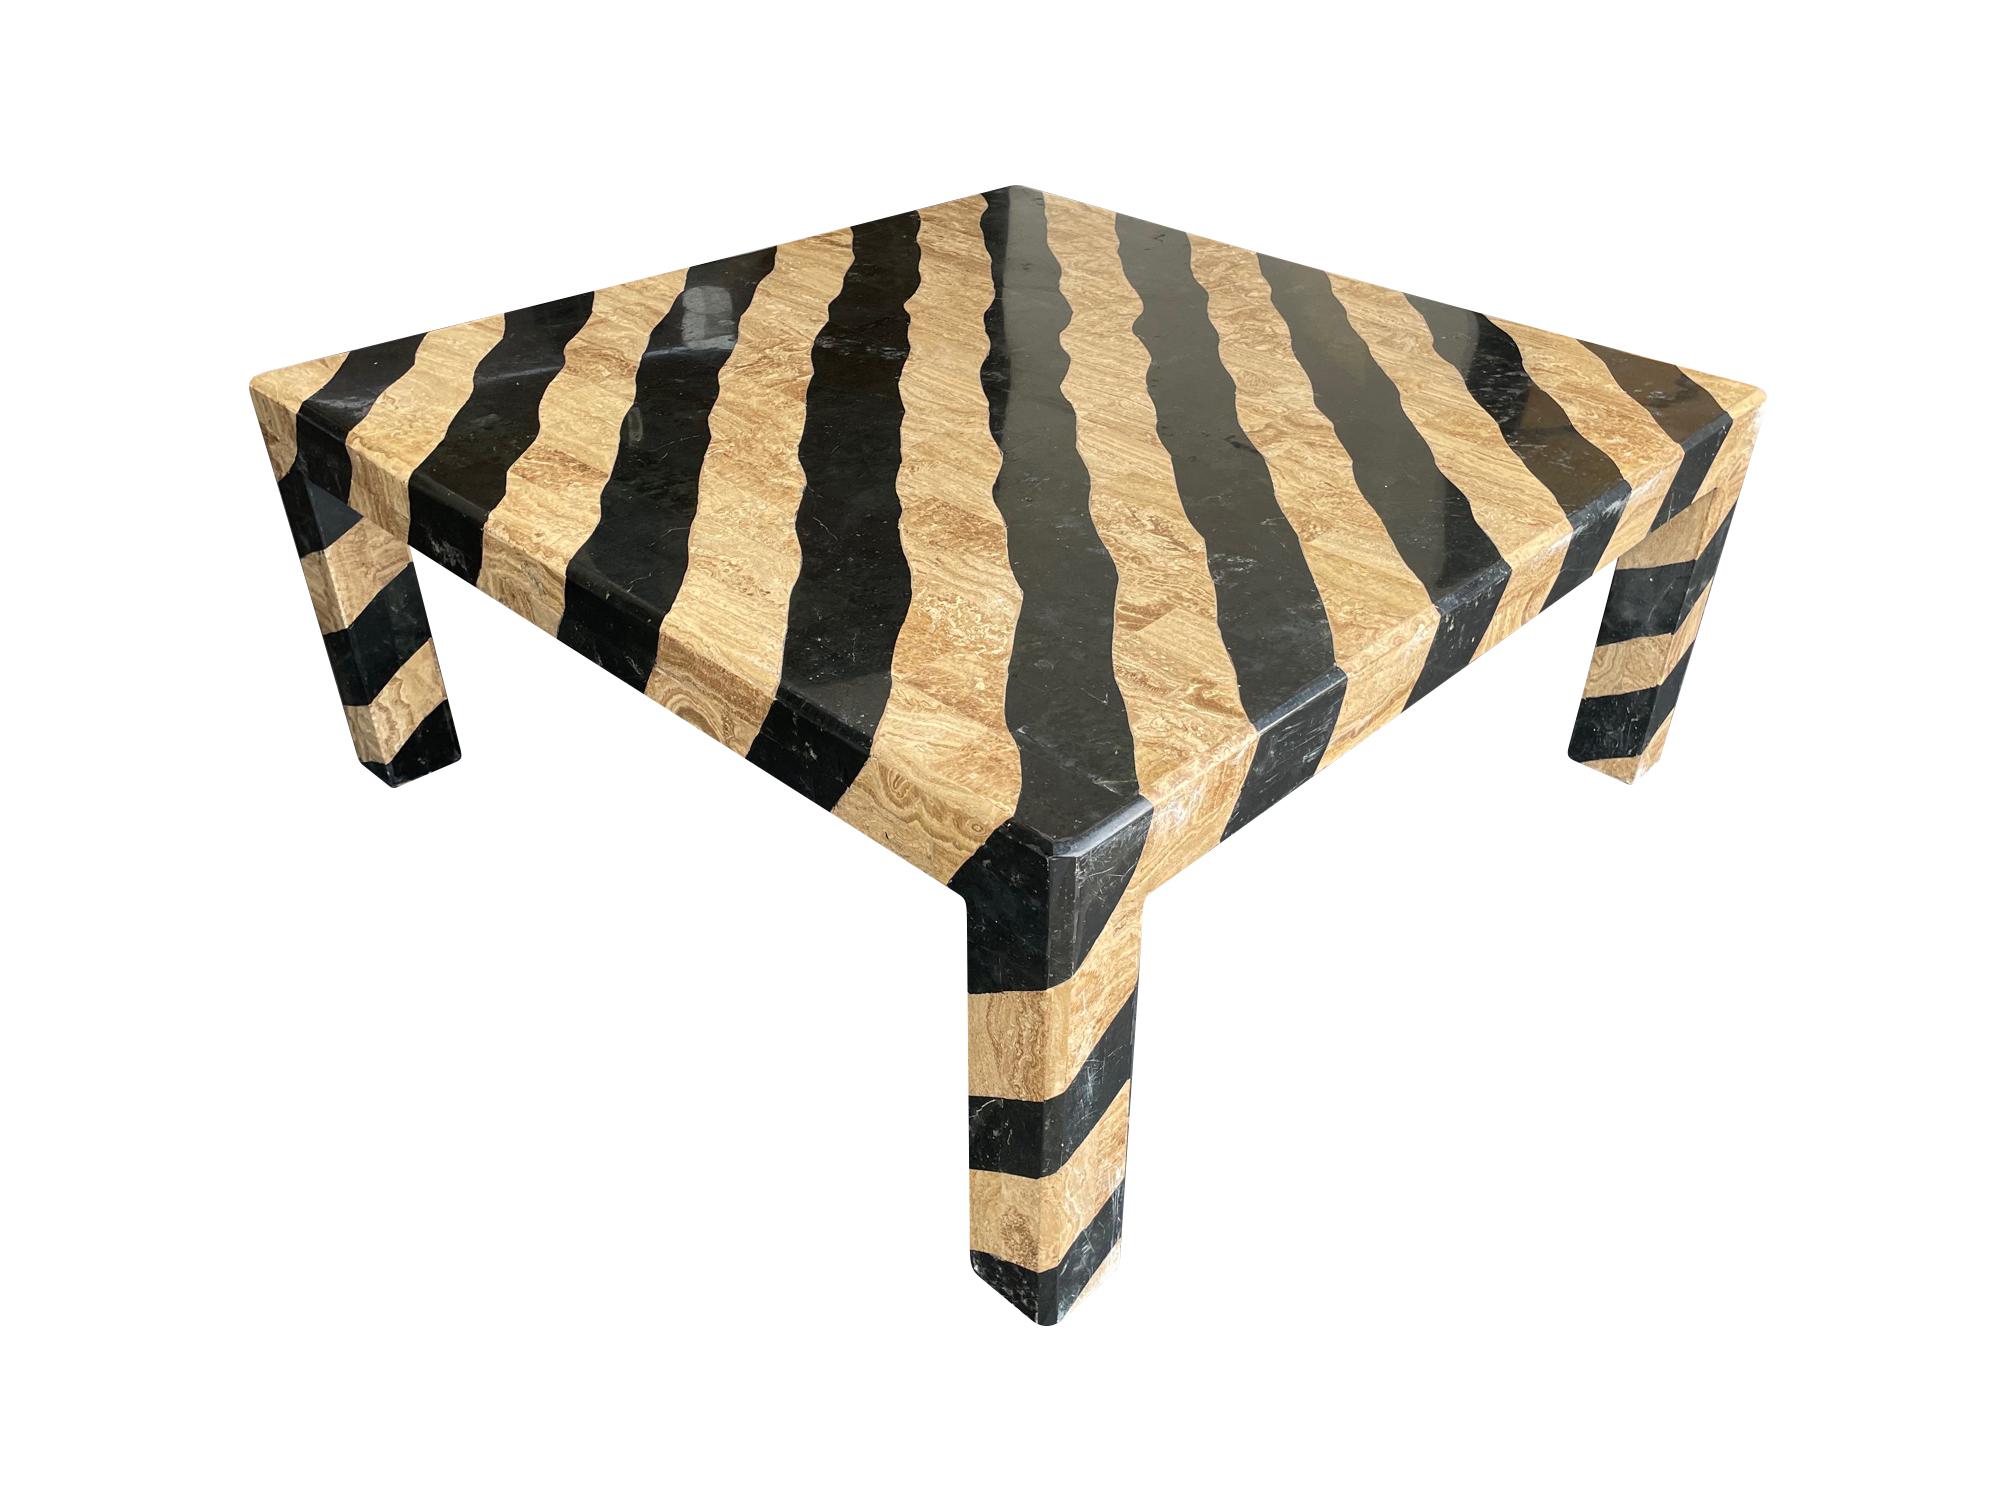 A 1970's Maitland Smith coffee table with zebra pattern tessellated marble finish. The detail and quality of work is fantastic to create large stripes over the whole table and legs.